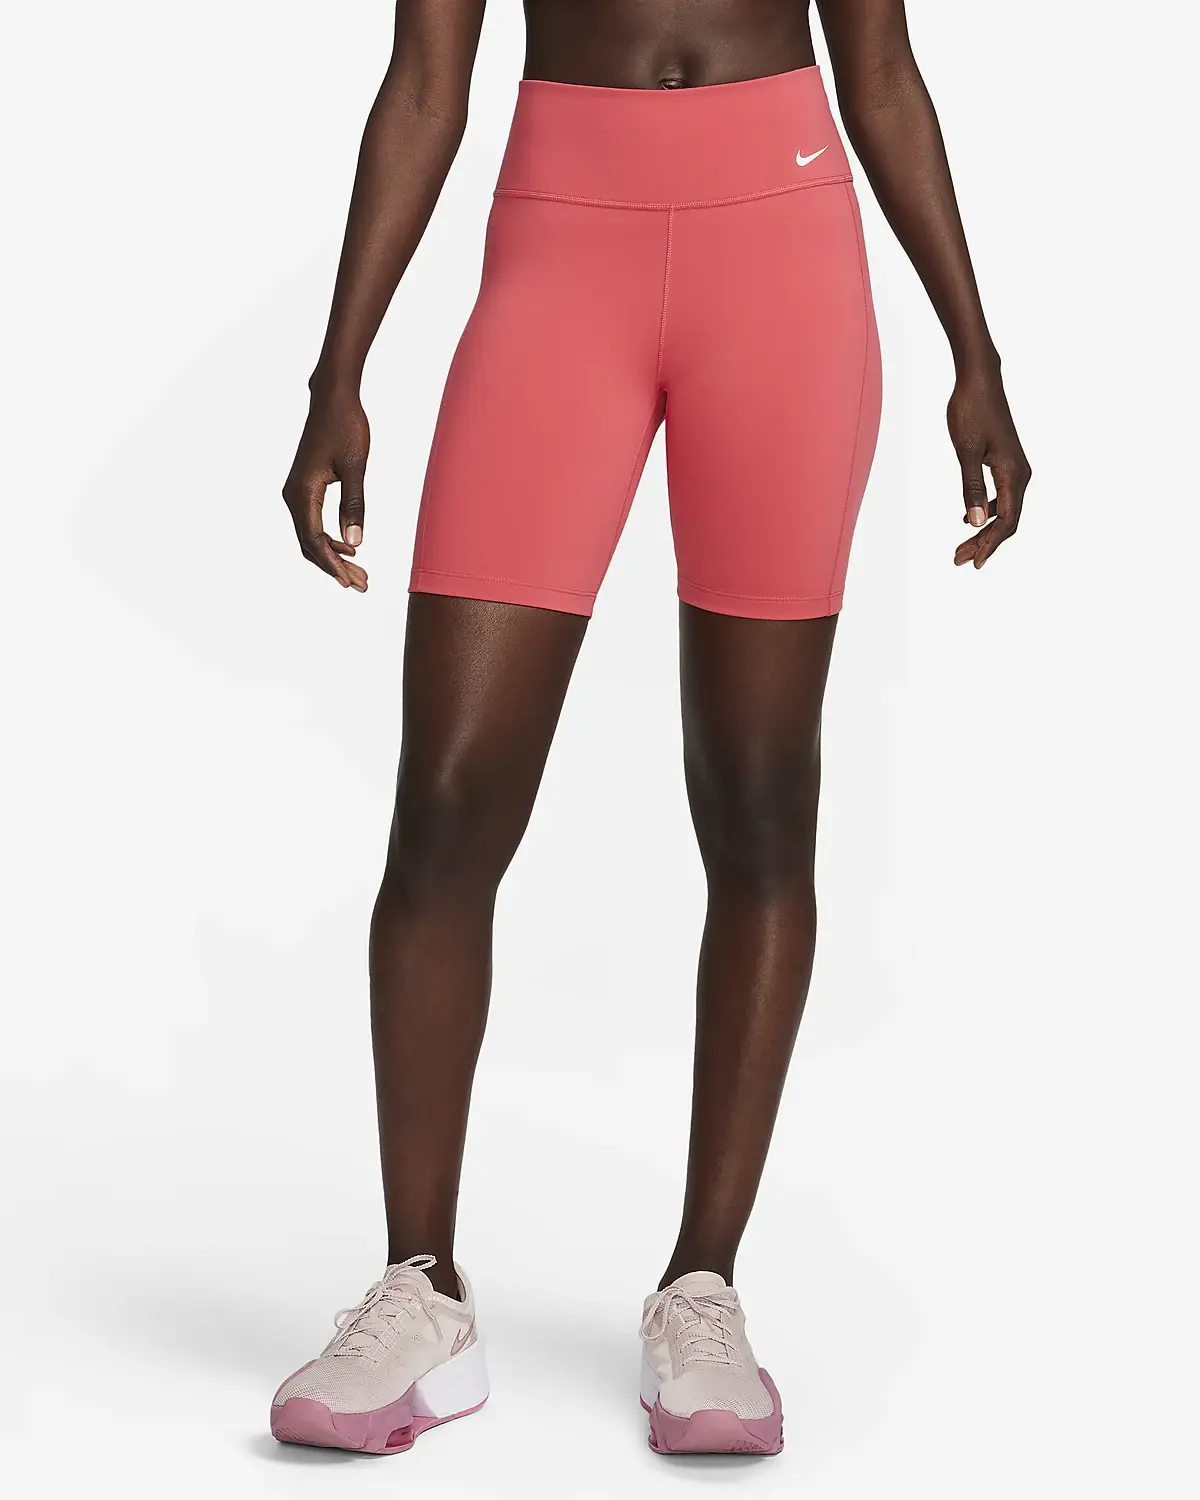 Nike One Leak Protection: Periodensichere. 1